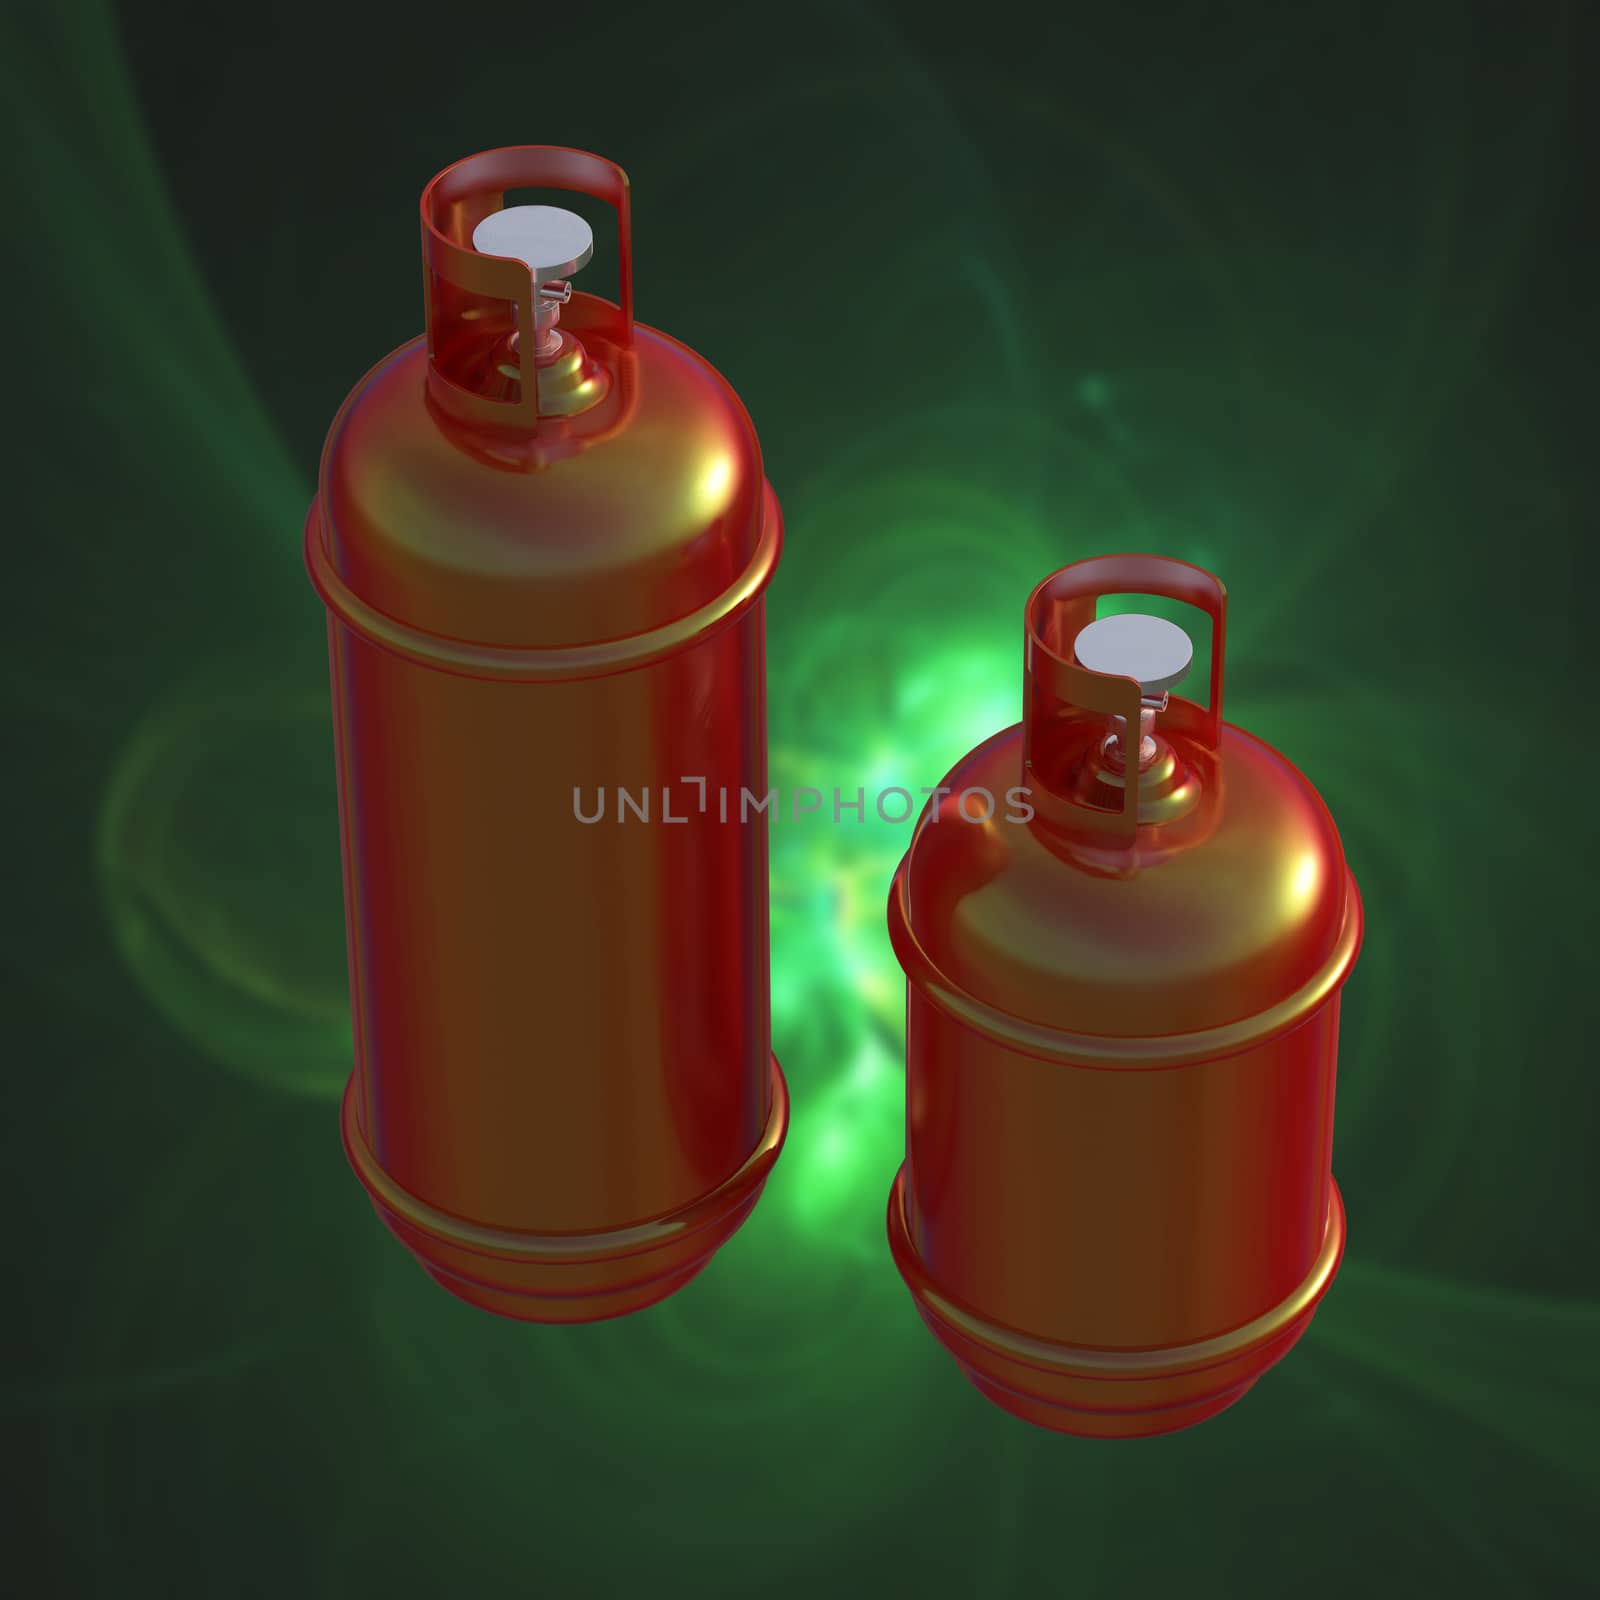 Propane gas cylinder isolated on a green background . 3d illustration.